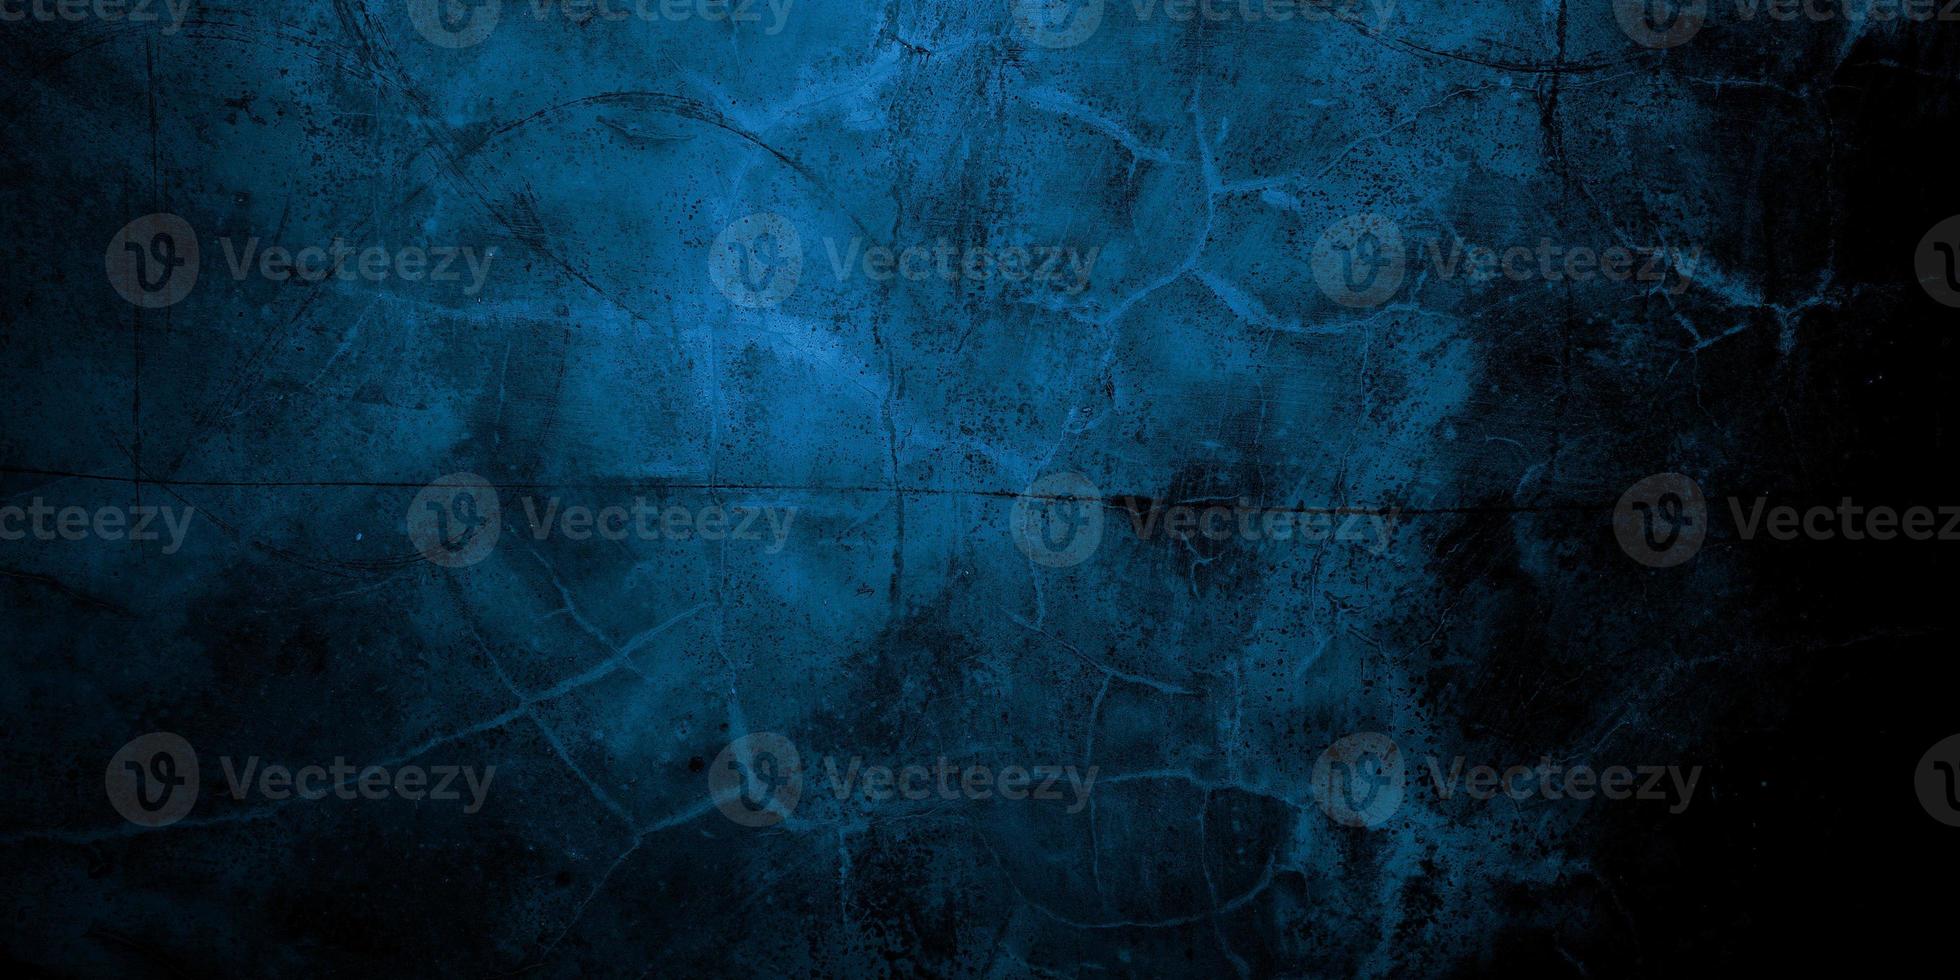 Scary dark blue cracked wall for background photo